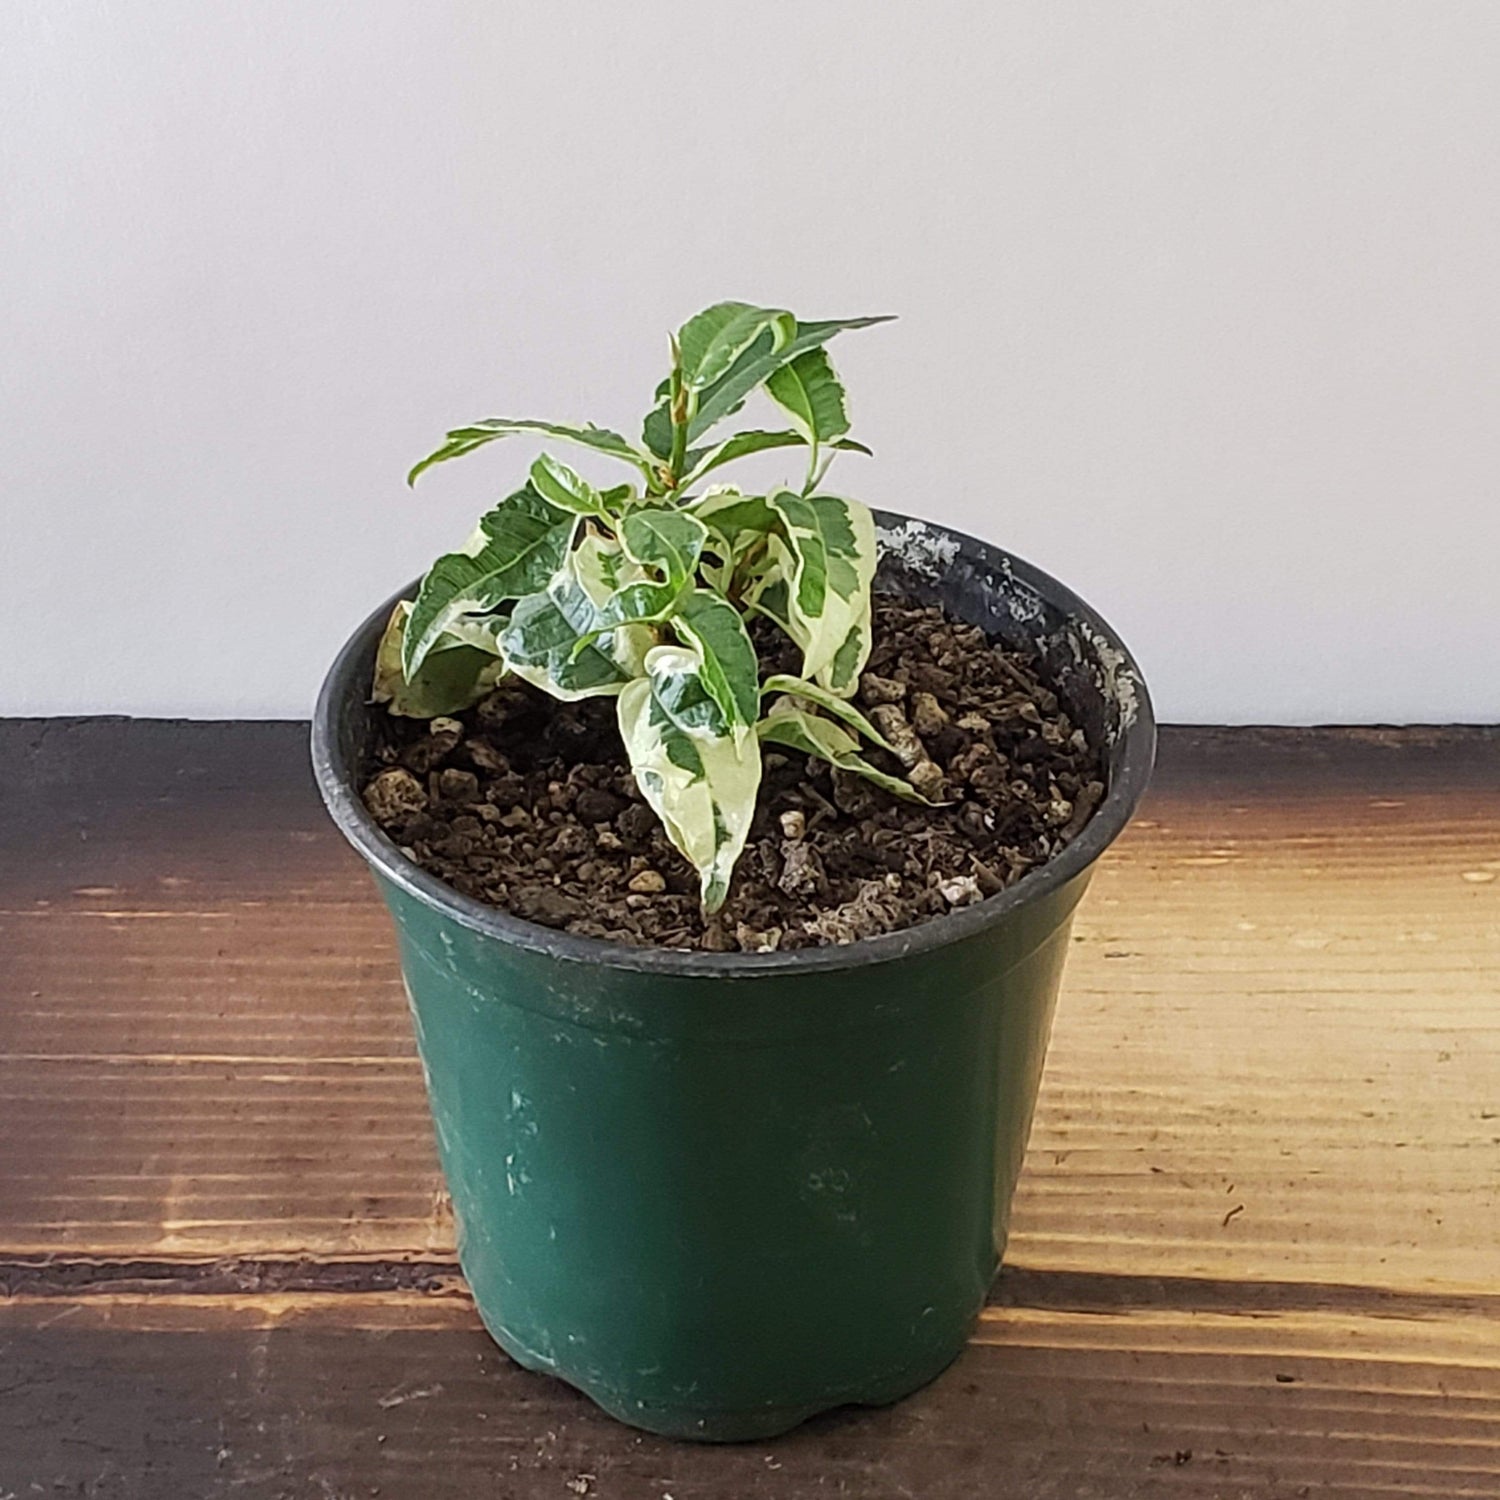 Urban Sprouts Plant 4" in nursery pot Fig 'Silver Leaf'